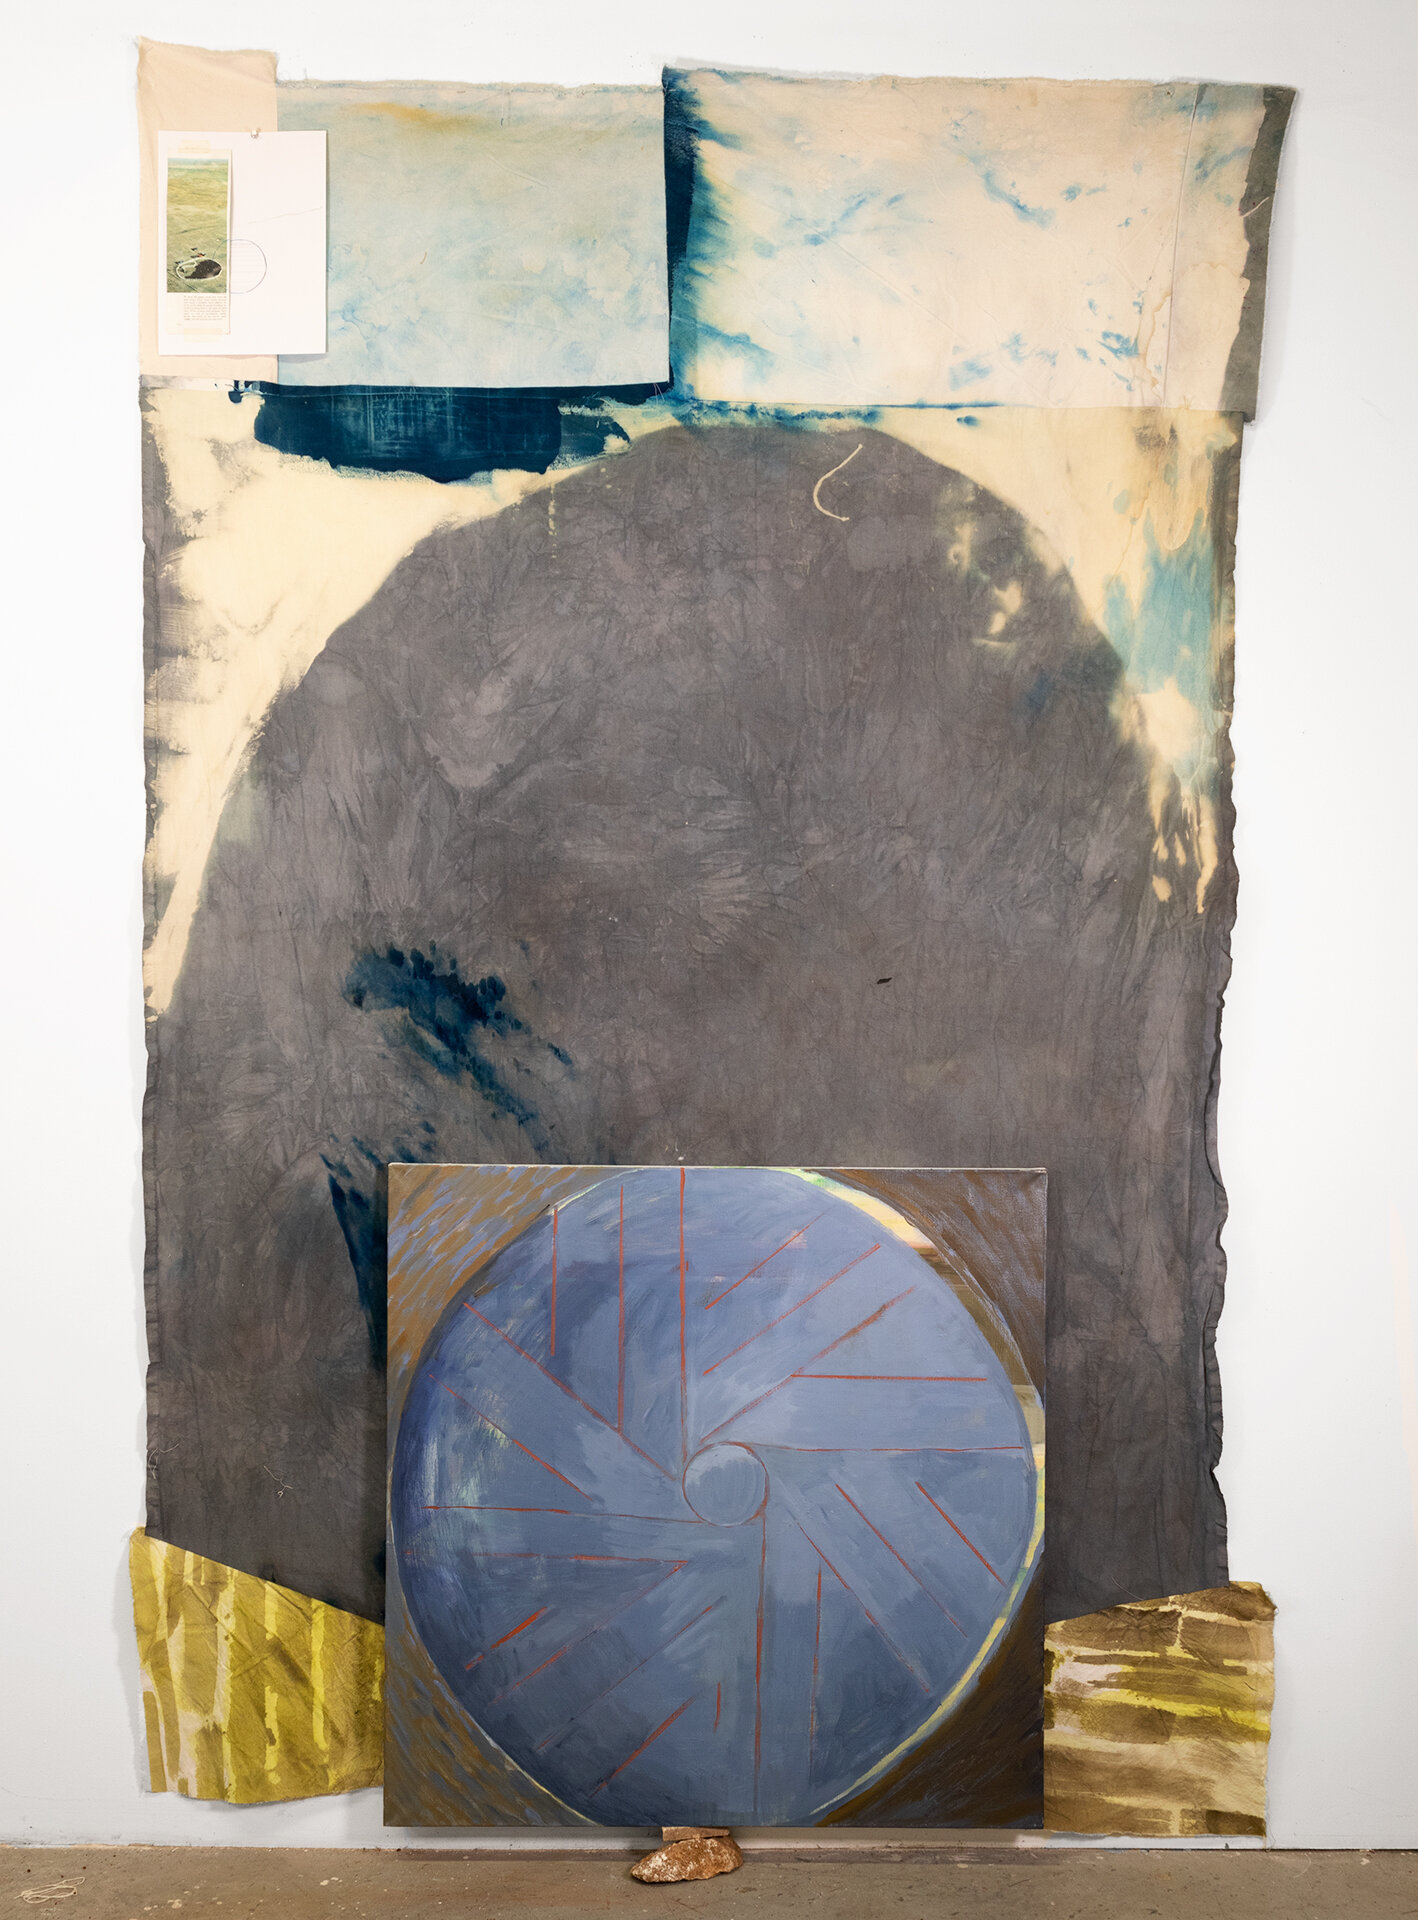   Wait Till Next Year   36 x 36 (inner panel); 96 x 60 (outer canvas)  Dye, bleach, acrylic, oil, Tennessee marble, graphite, and collage on sewn, unstretched canvas  2019    